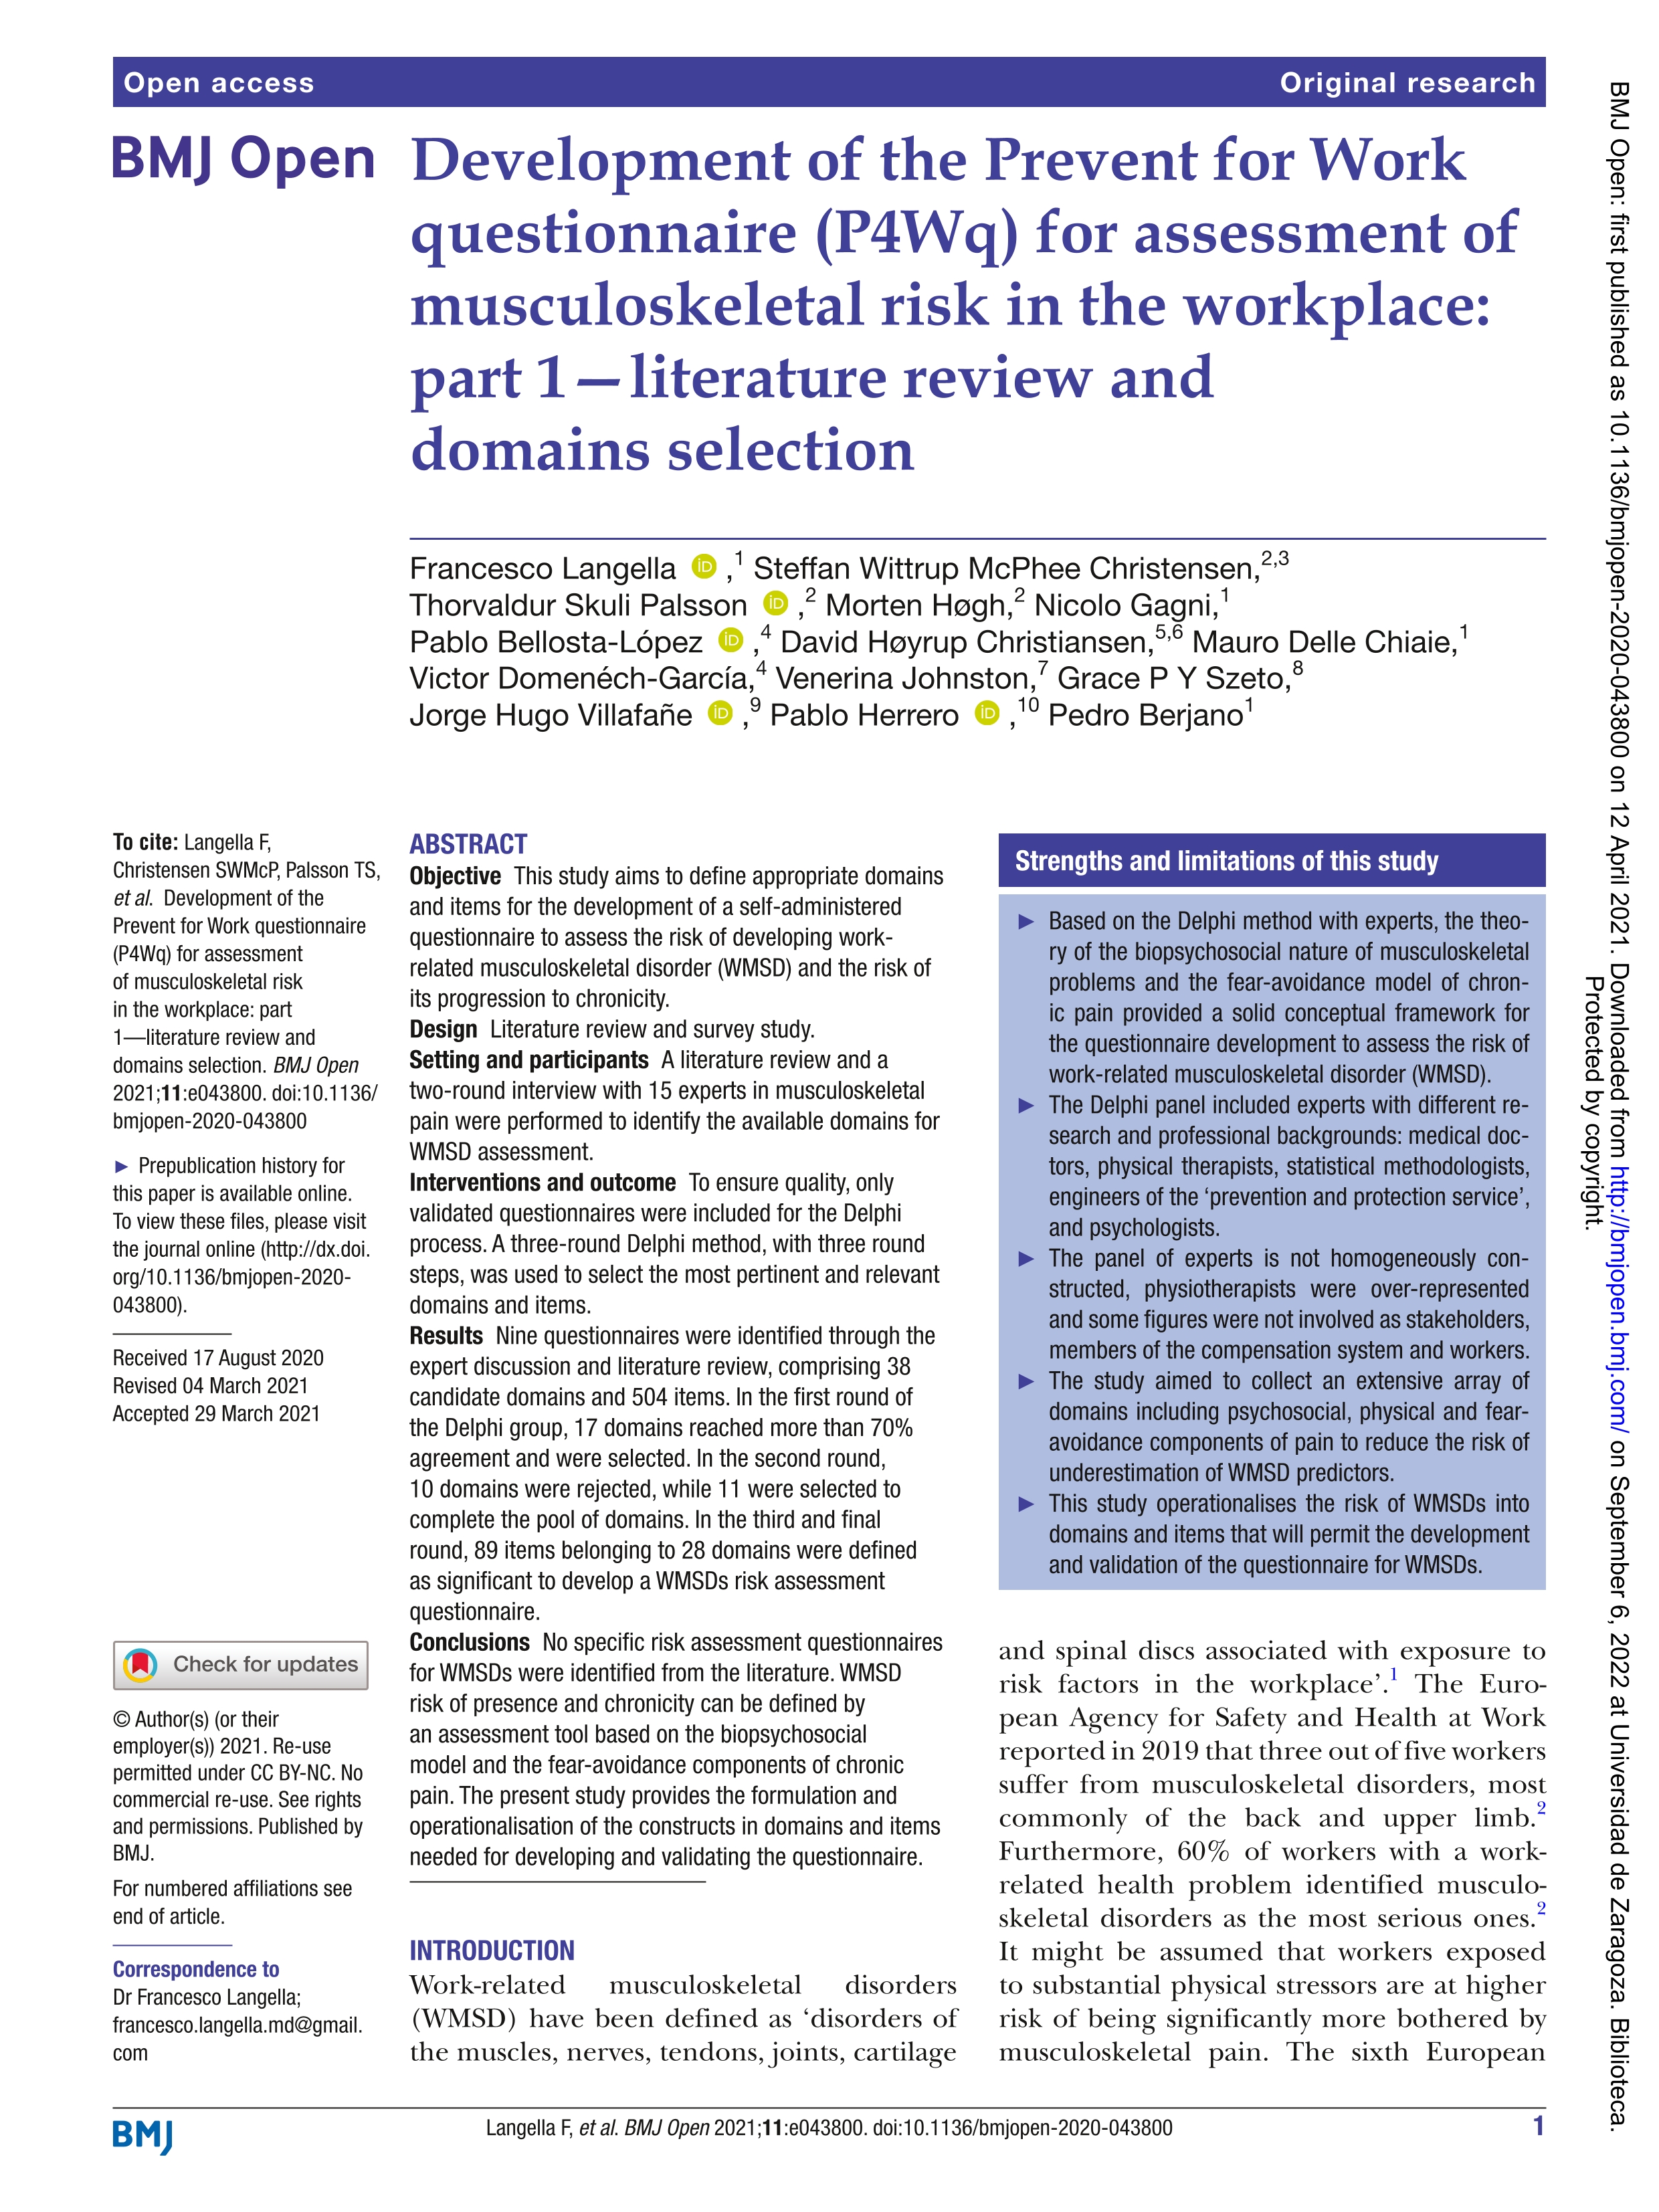 Development of the Prevent for Work questionnaire (P4Wq) for assessment of musculoskeletal risk in the workplace: part 1-literature review and domains selection